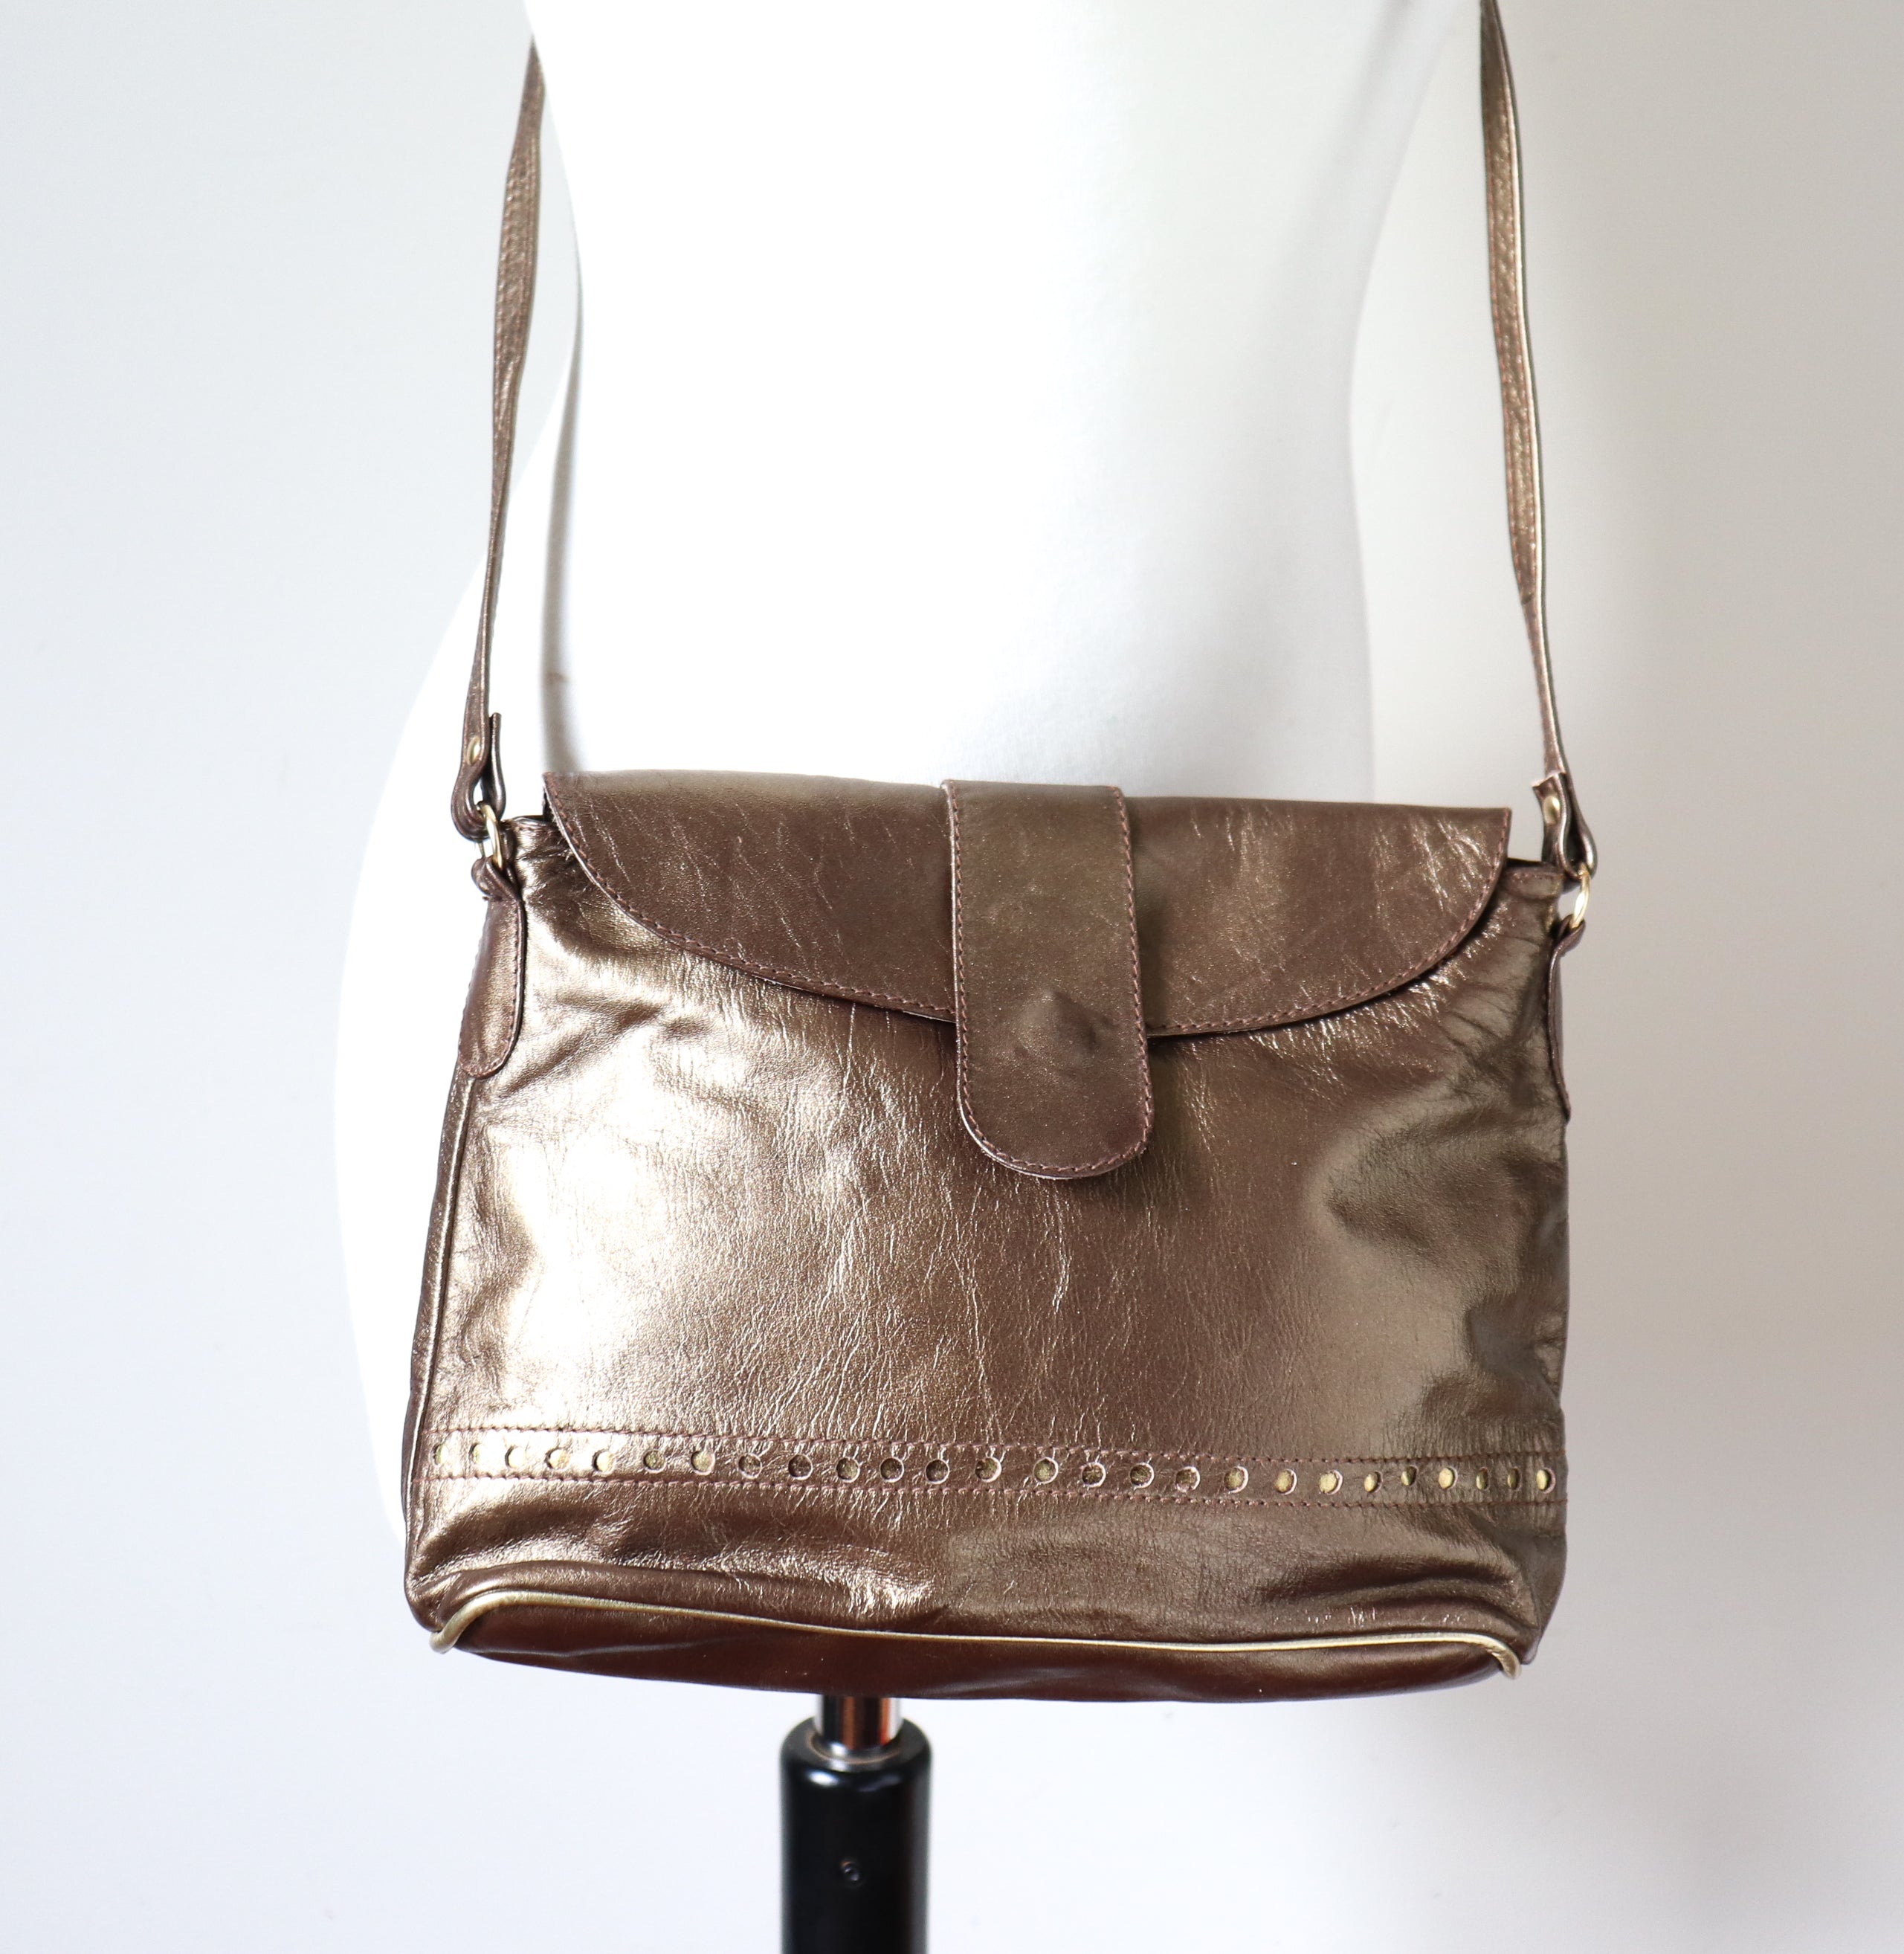 Crossbody Vintage Bag - Gold Faux Leather -Disco - Small